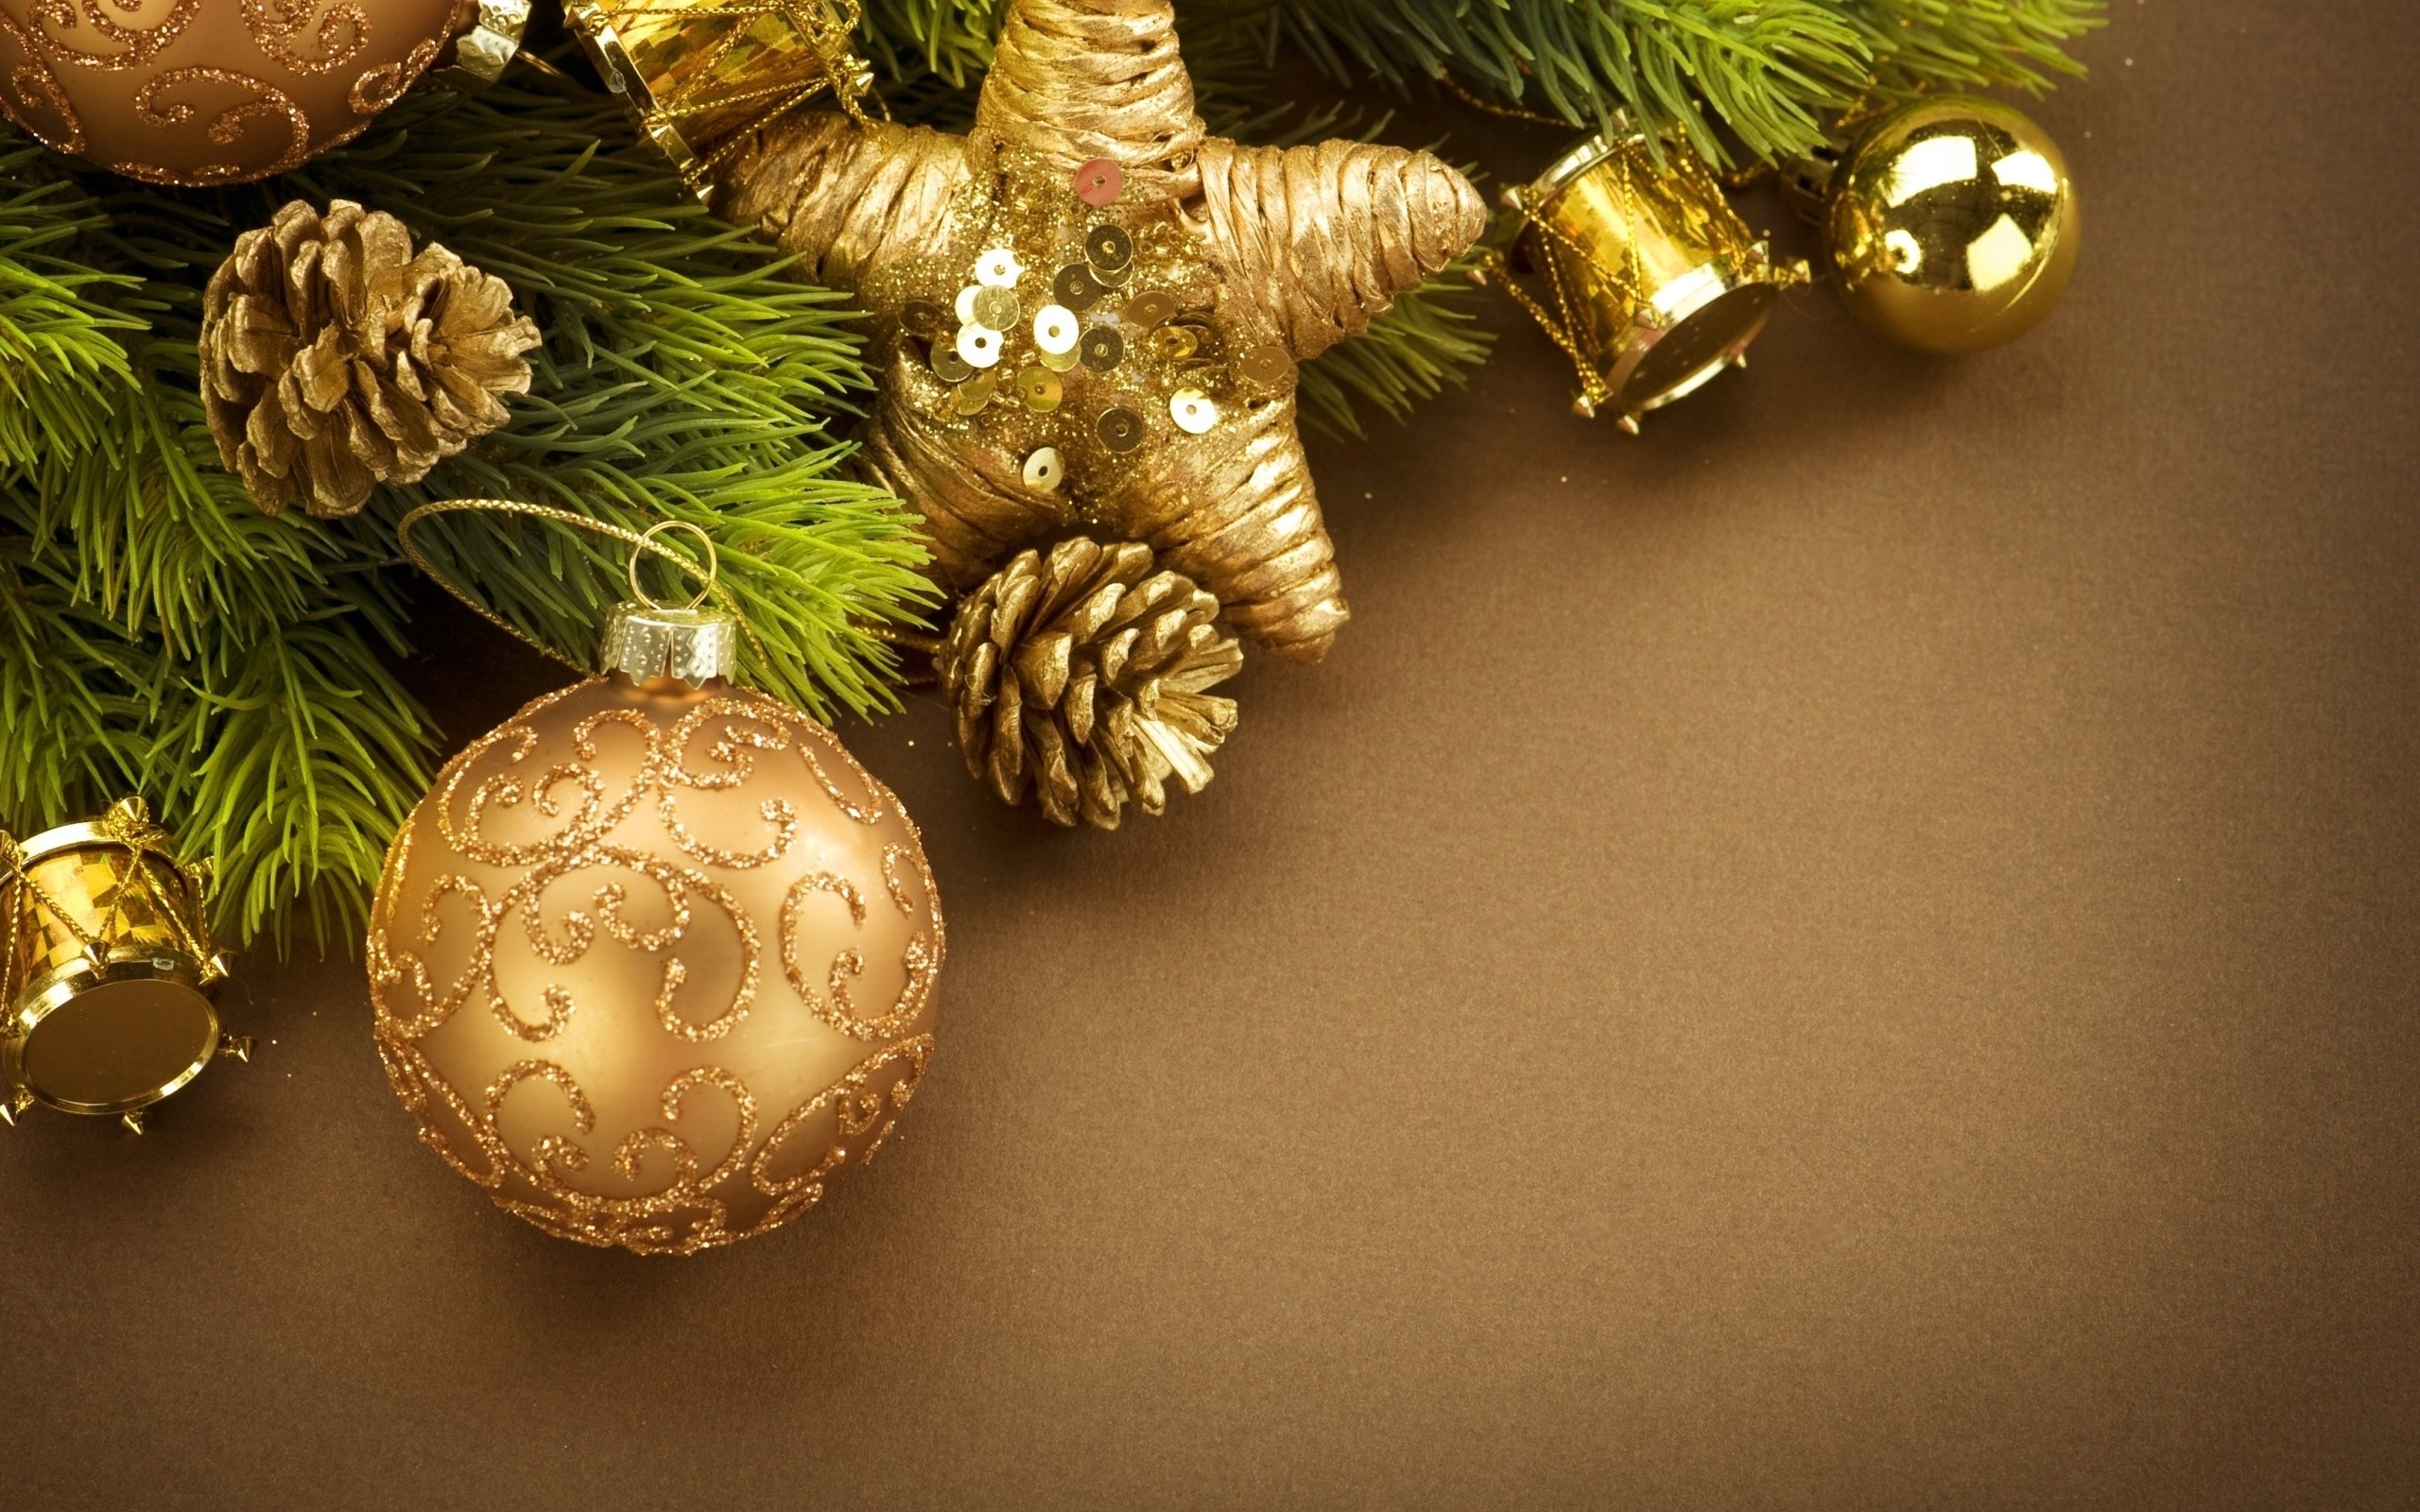 New Year, Christmas Ornaments, Cones, Leaves, Decorations Wallpaper